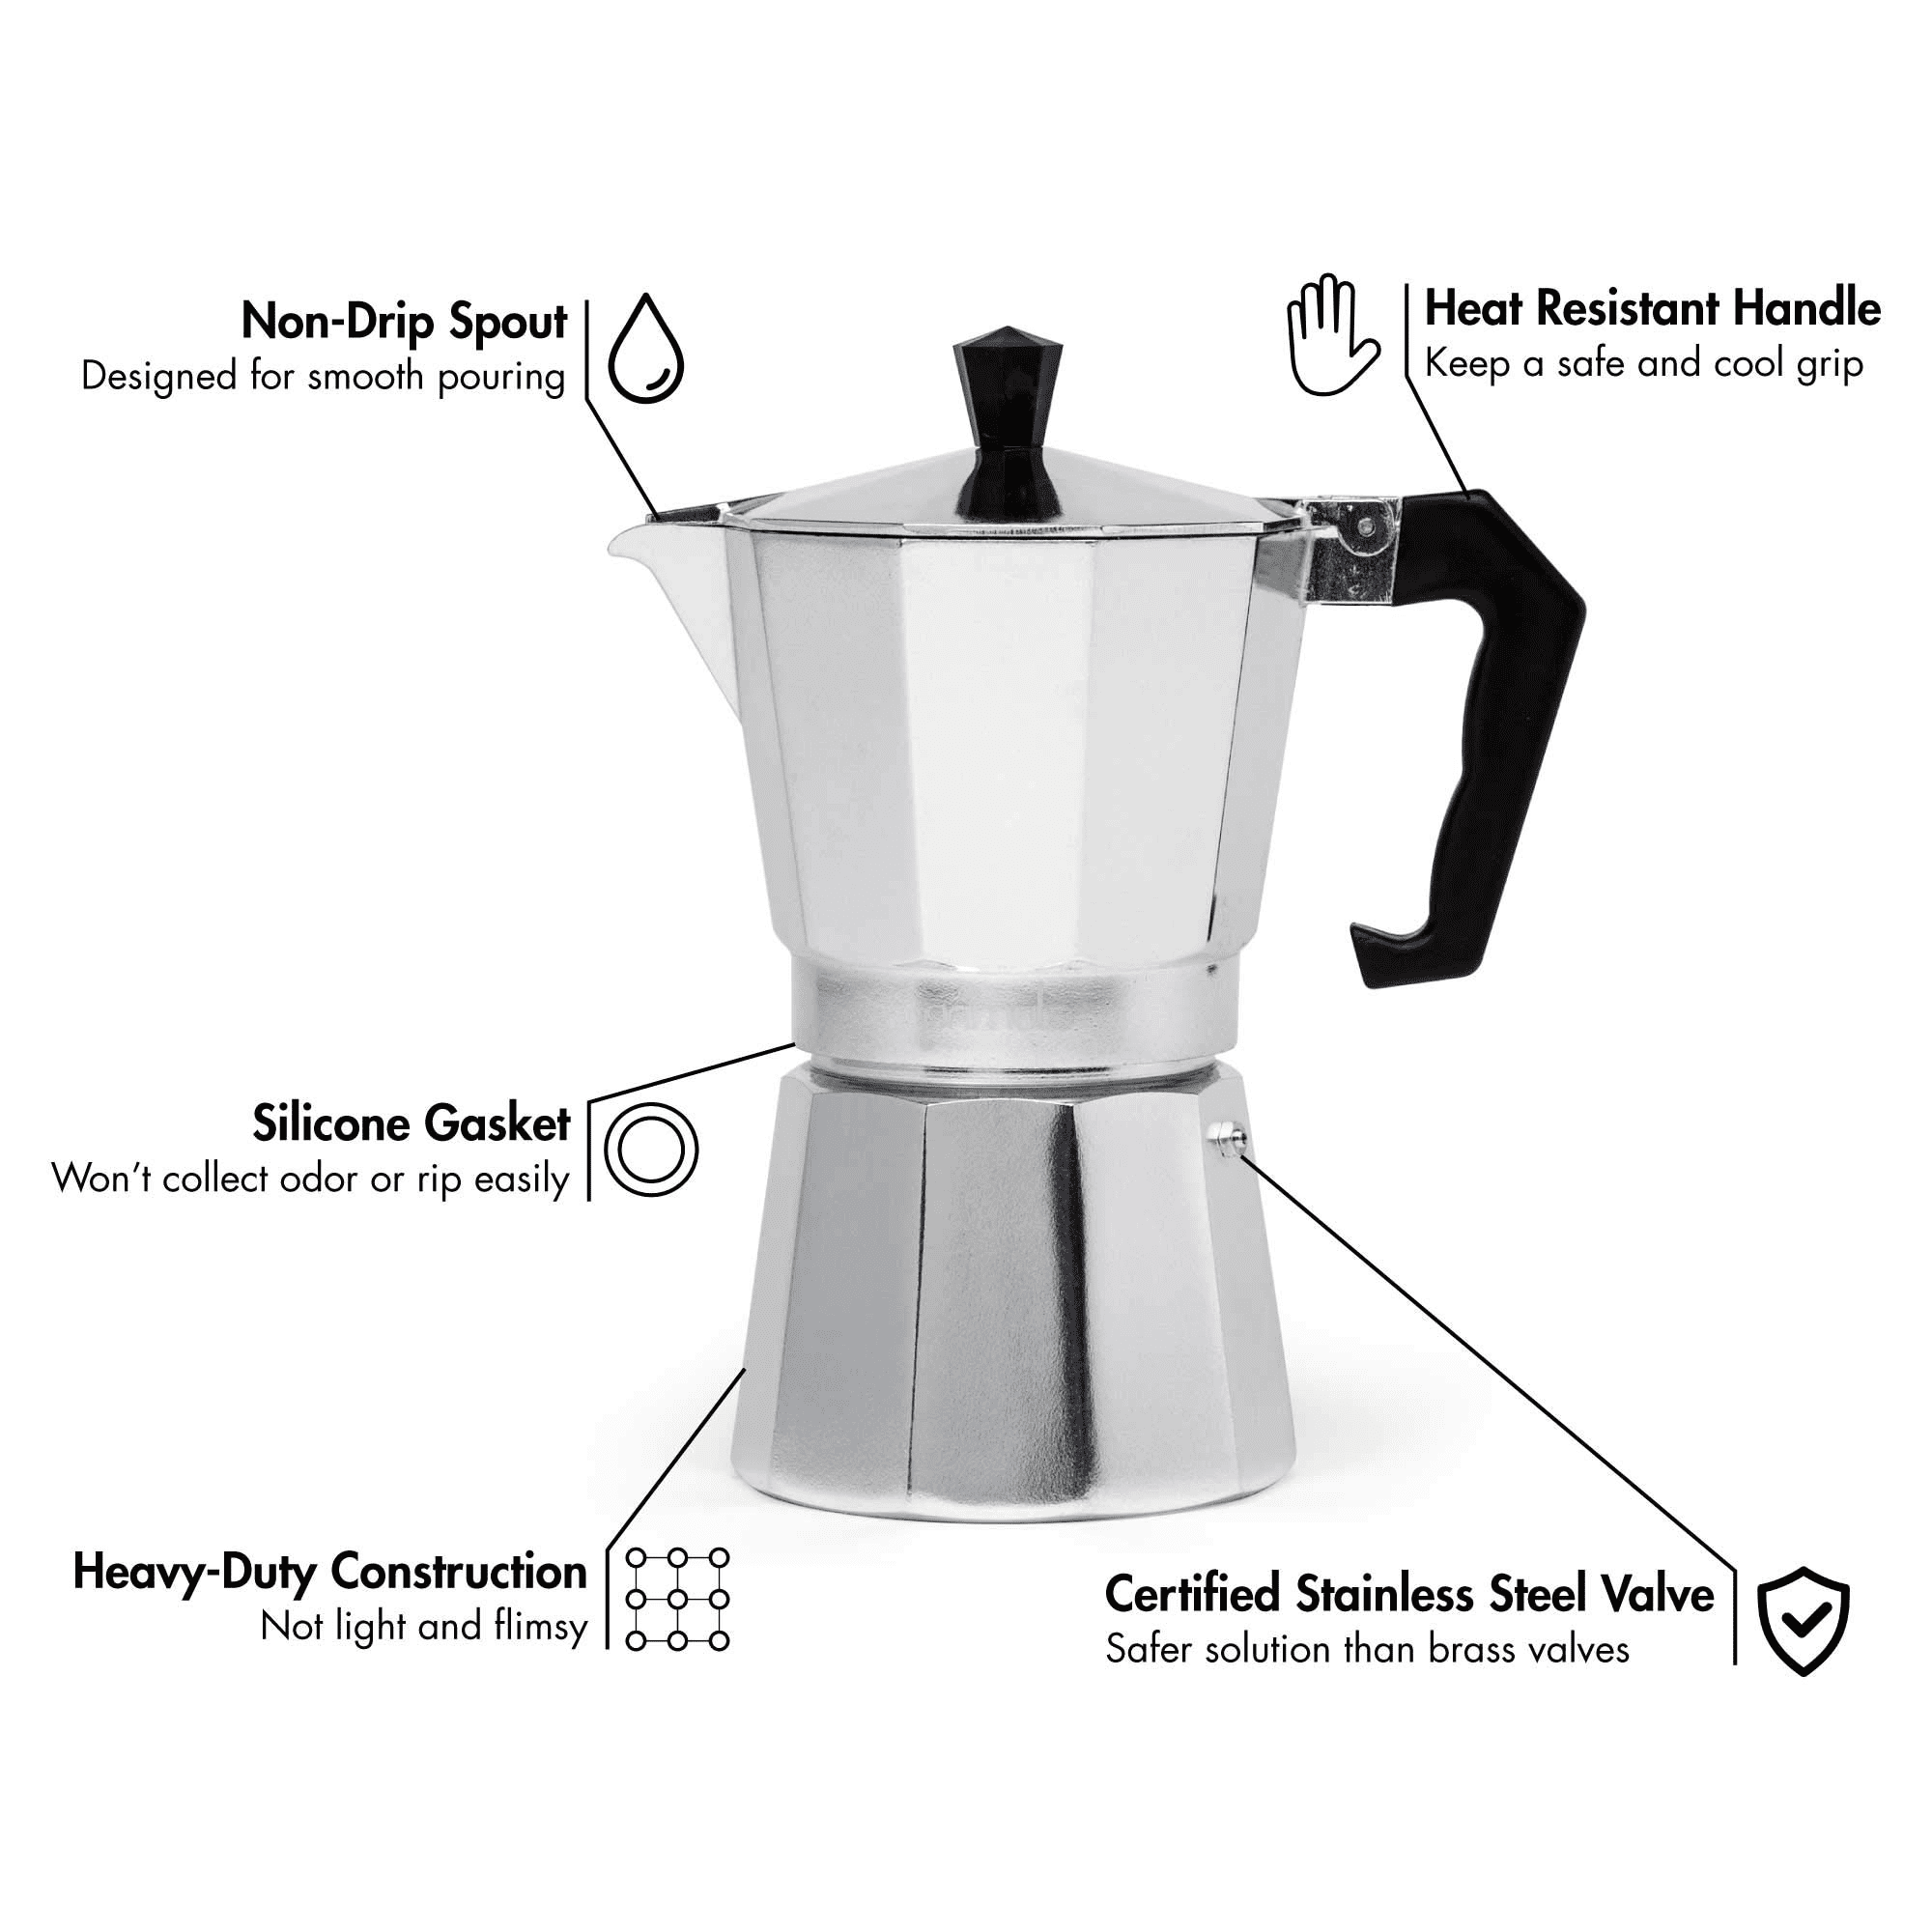 Square Root Moka Pot 450ml 9 cup – The Square Root